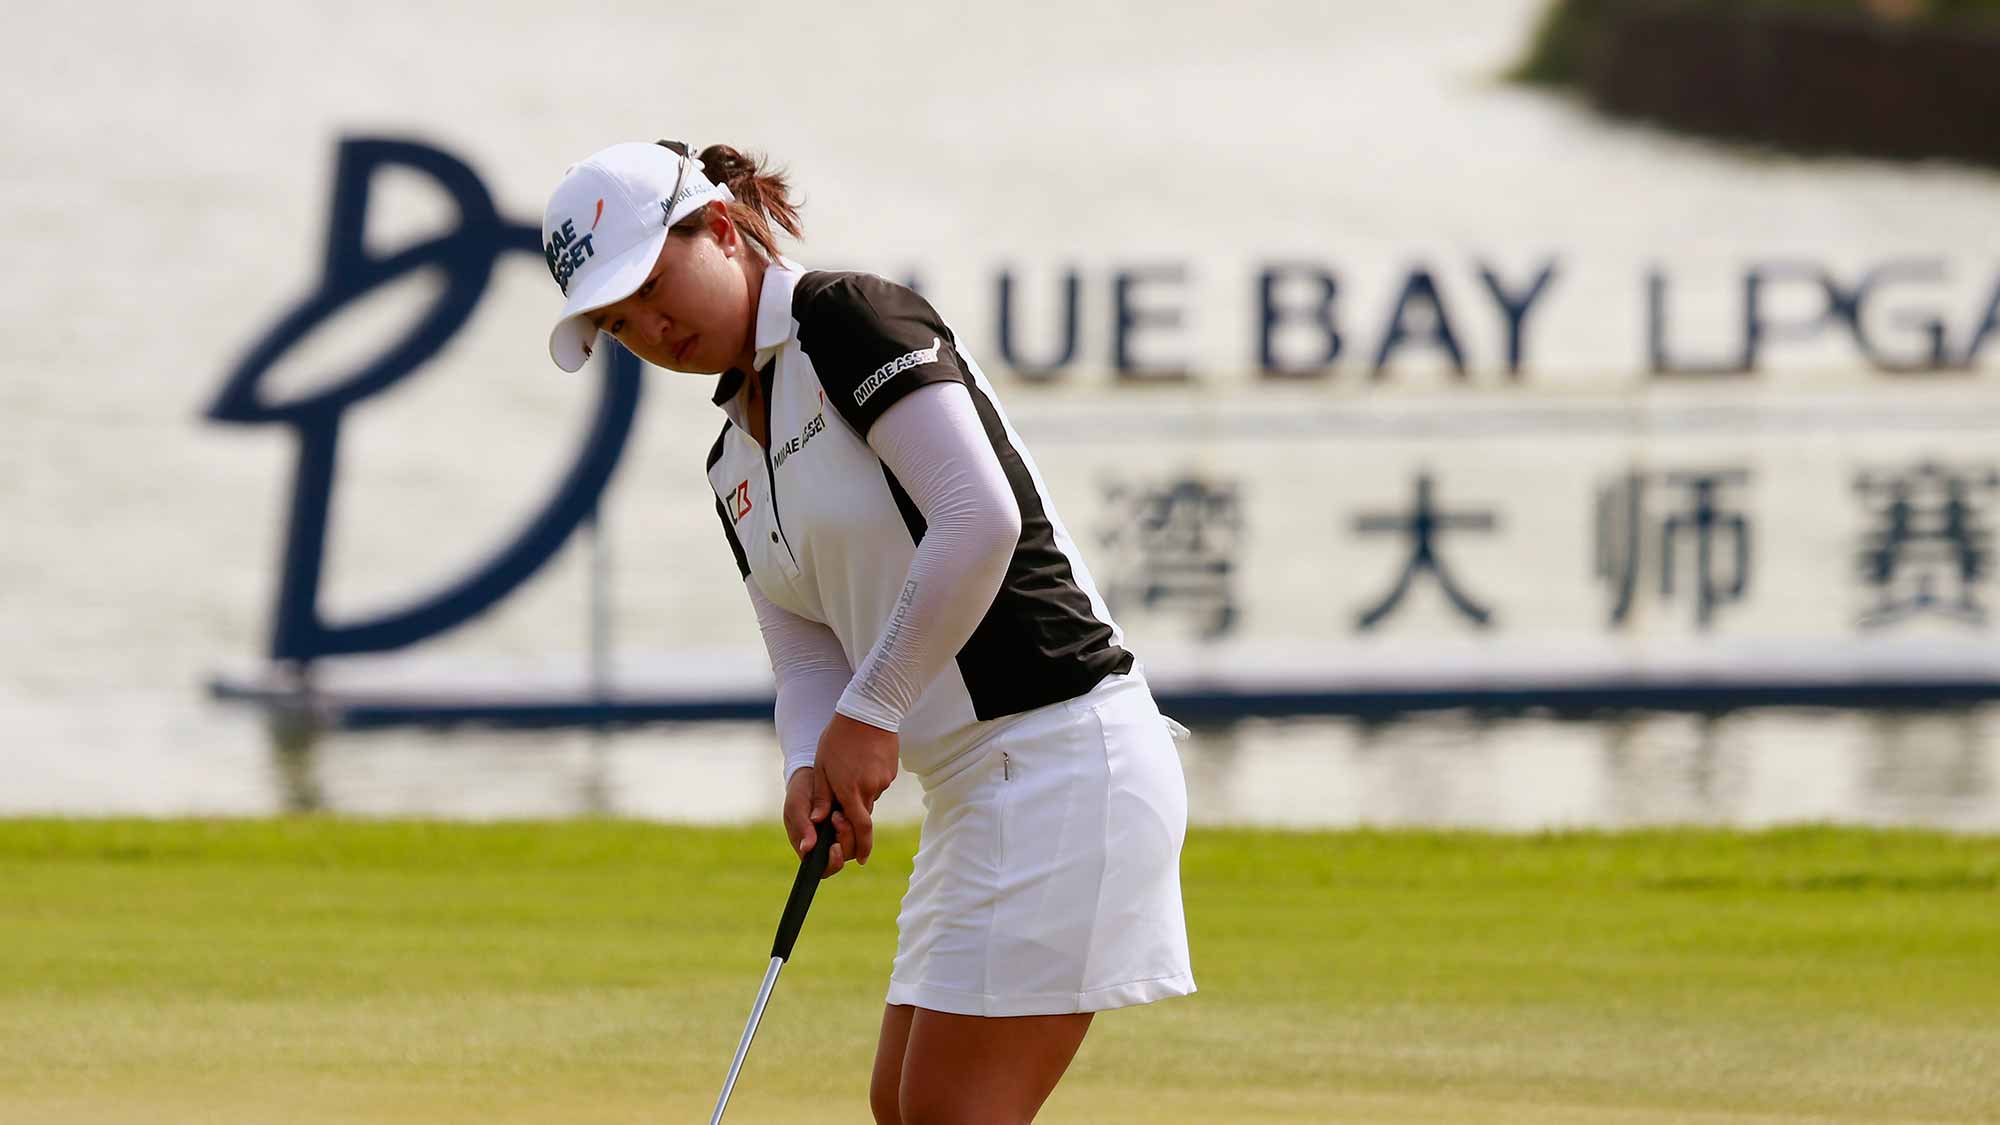 Sei Young Kim of Republic of Korea putts at the 18th green during Round 3 of Blue Bay LPGA of Day 3 